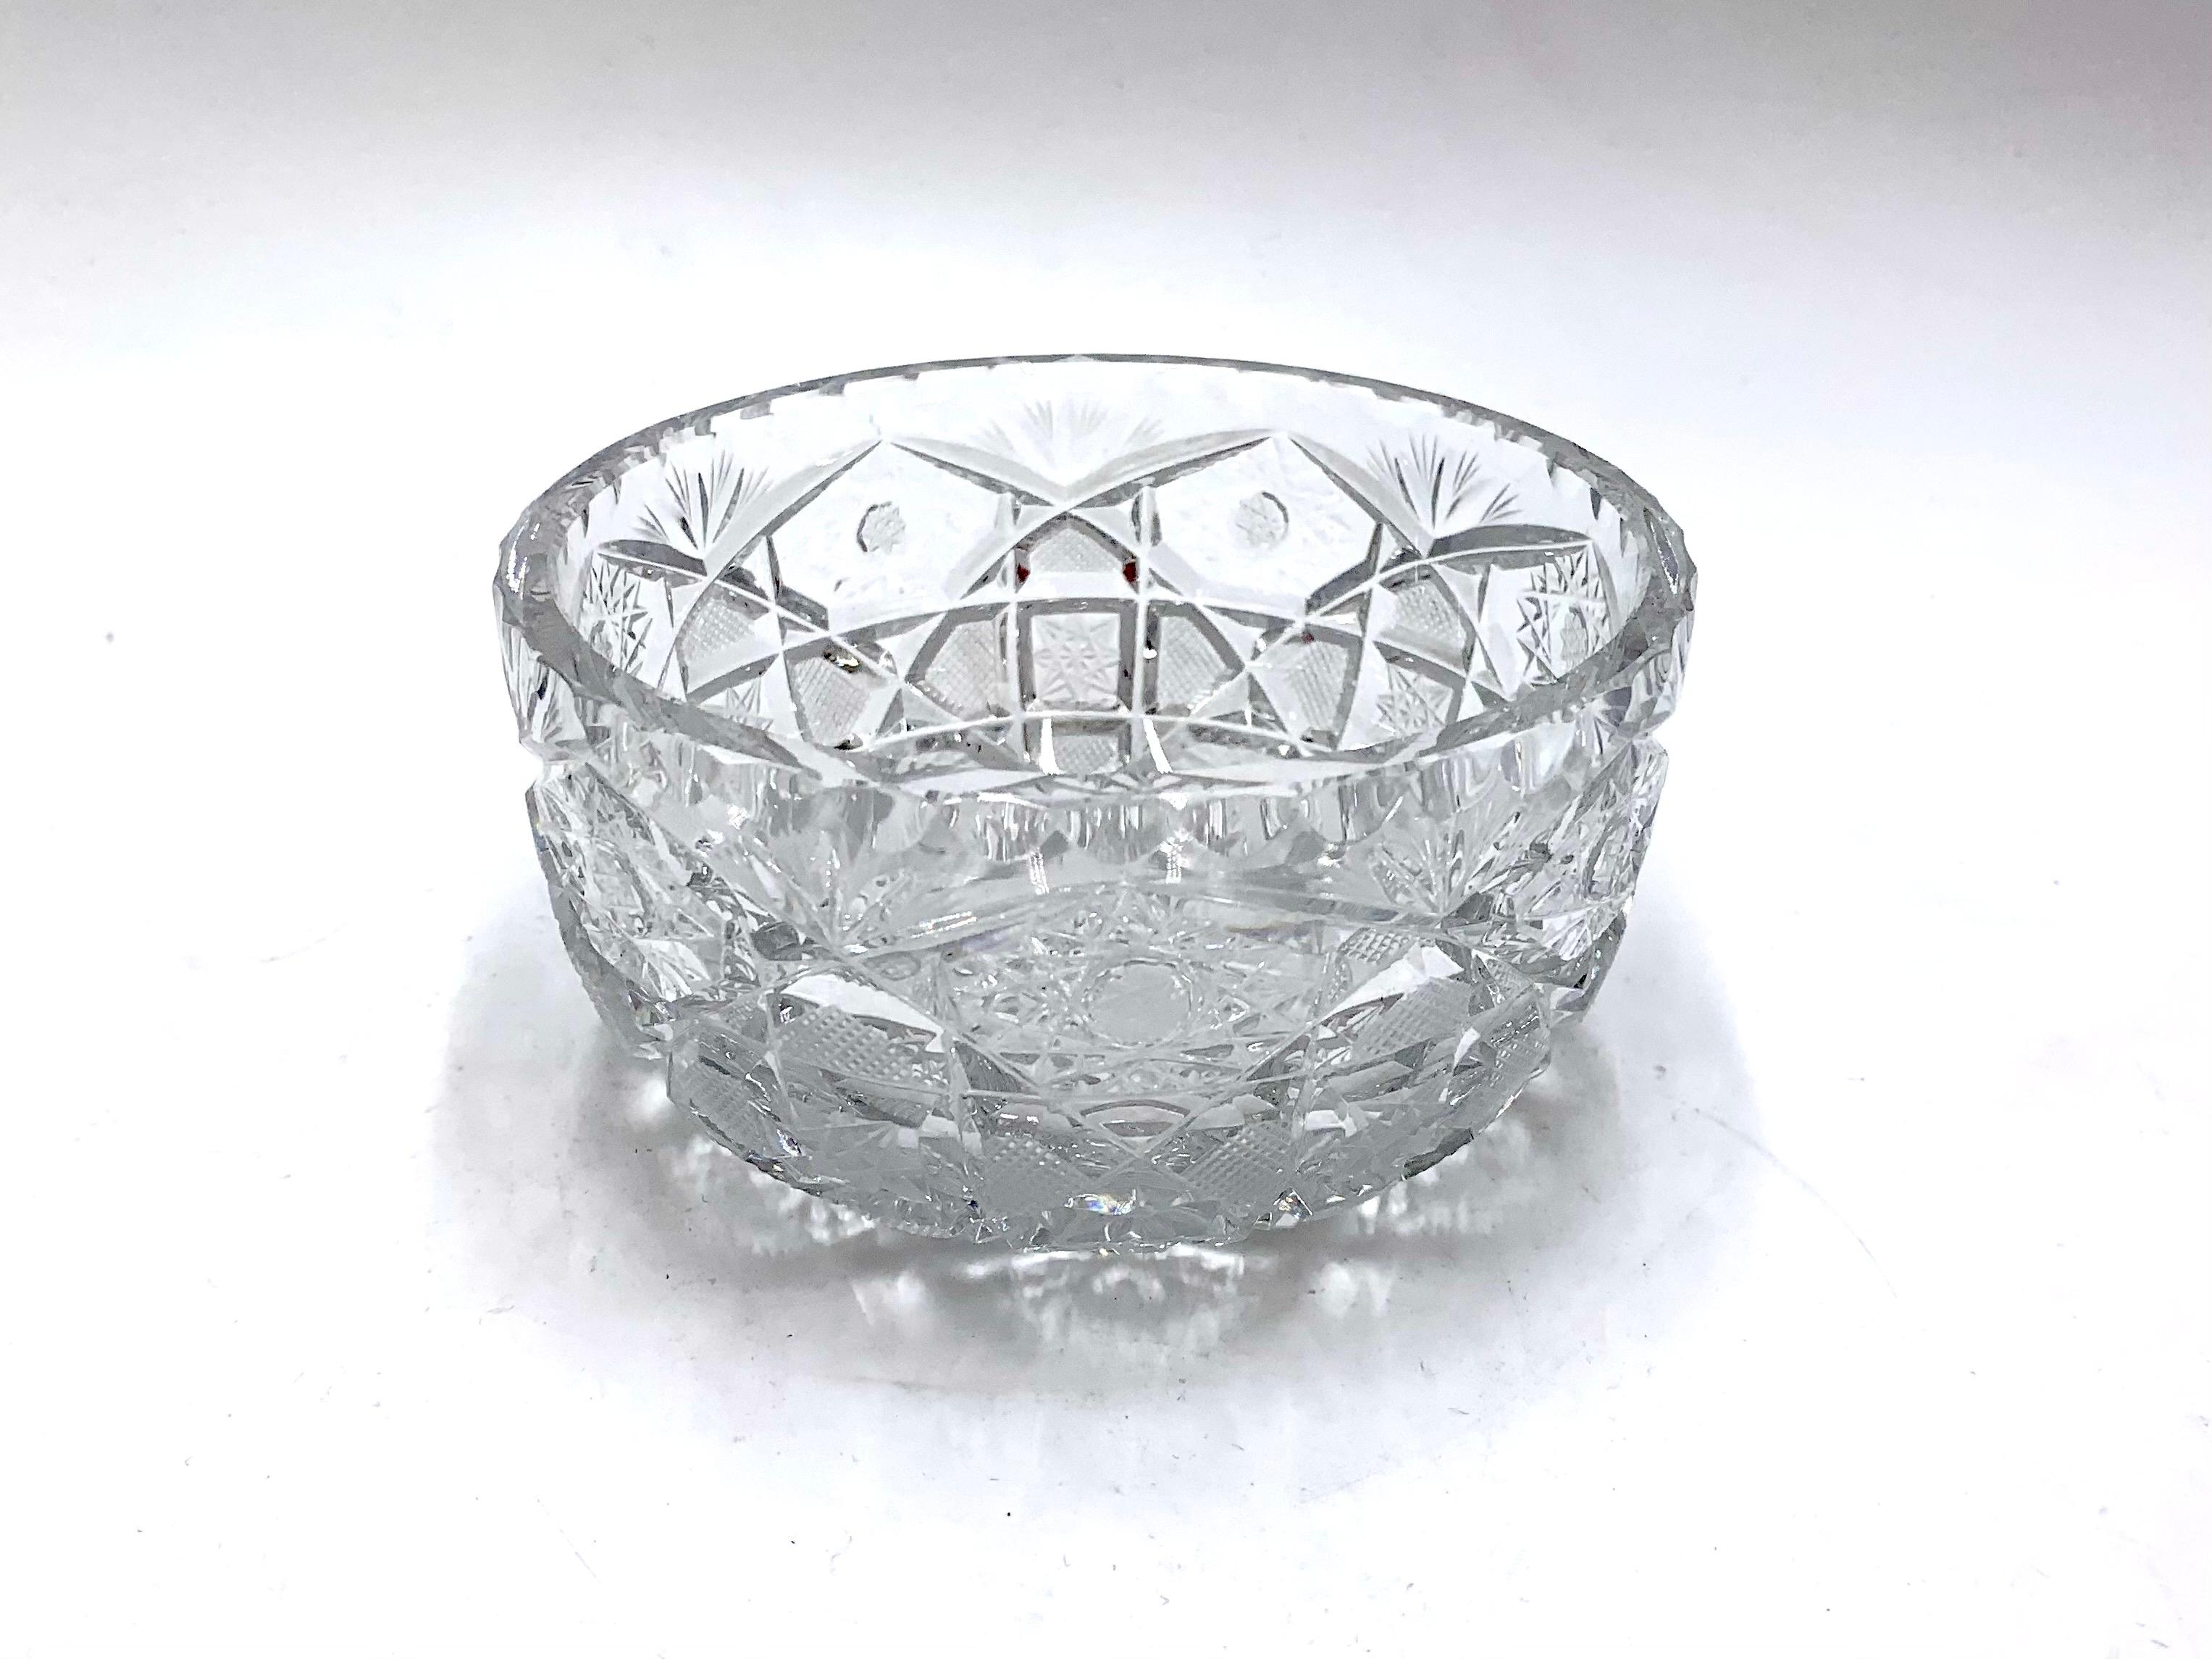 Crystal bowl - platter for sweets.
Made in Poland in the 1950s / 1960s.
Very good condition.
Dimensions: height 6cm, diameter 12.